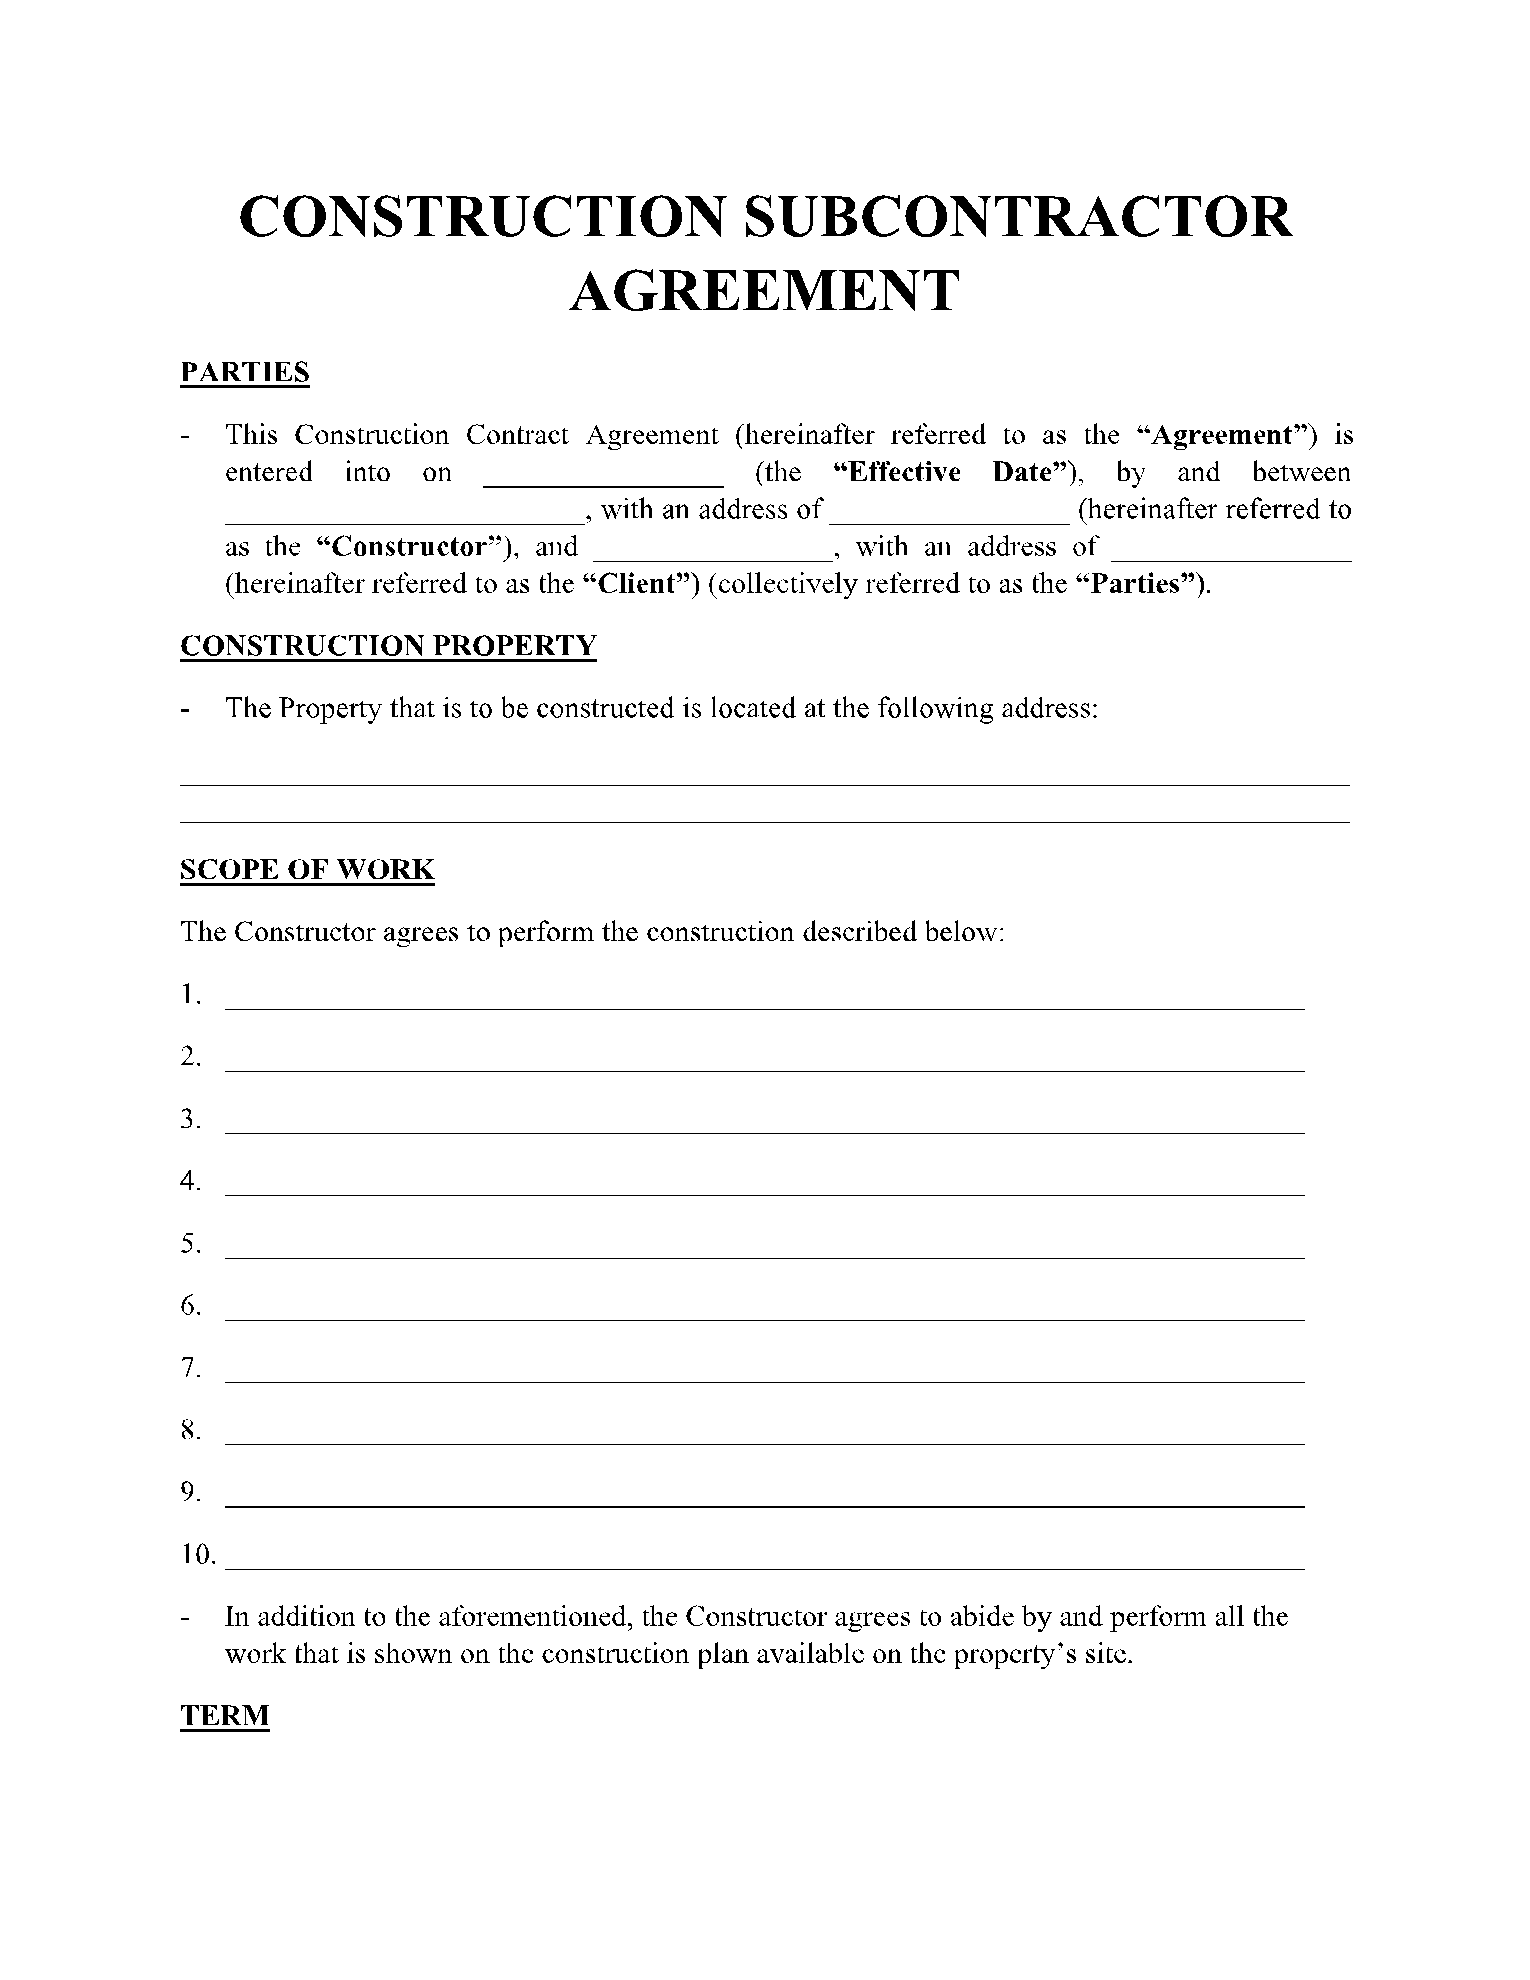 Construction Subcontractor Agreement